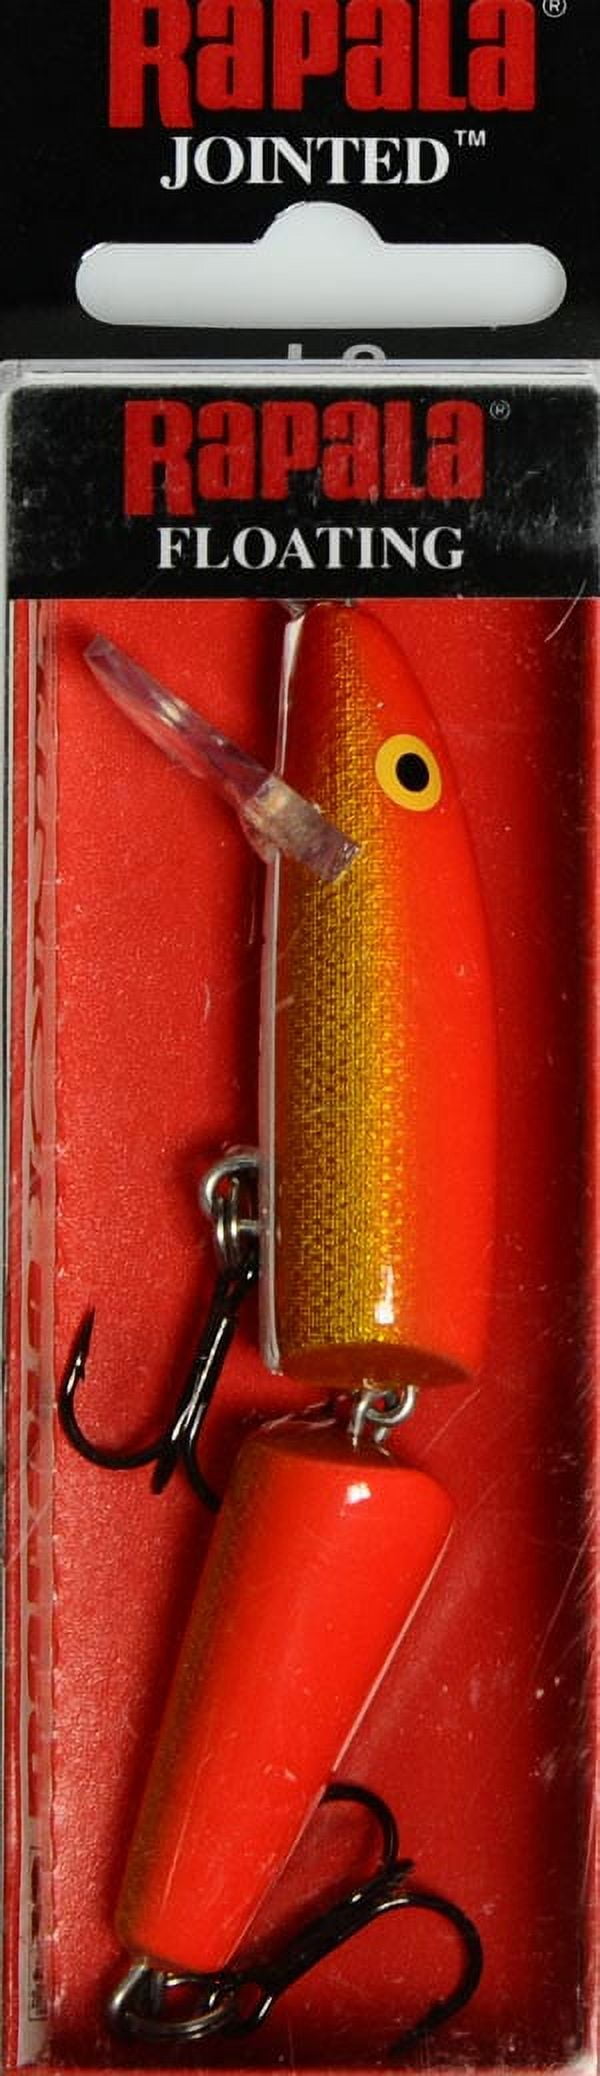 Rapala Jointed Minnow 09 Fishing Lure 3.5 1/4oz Brown Trout